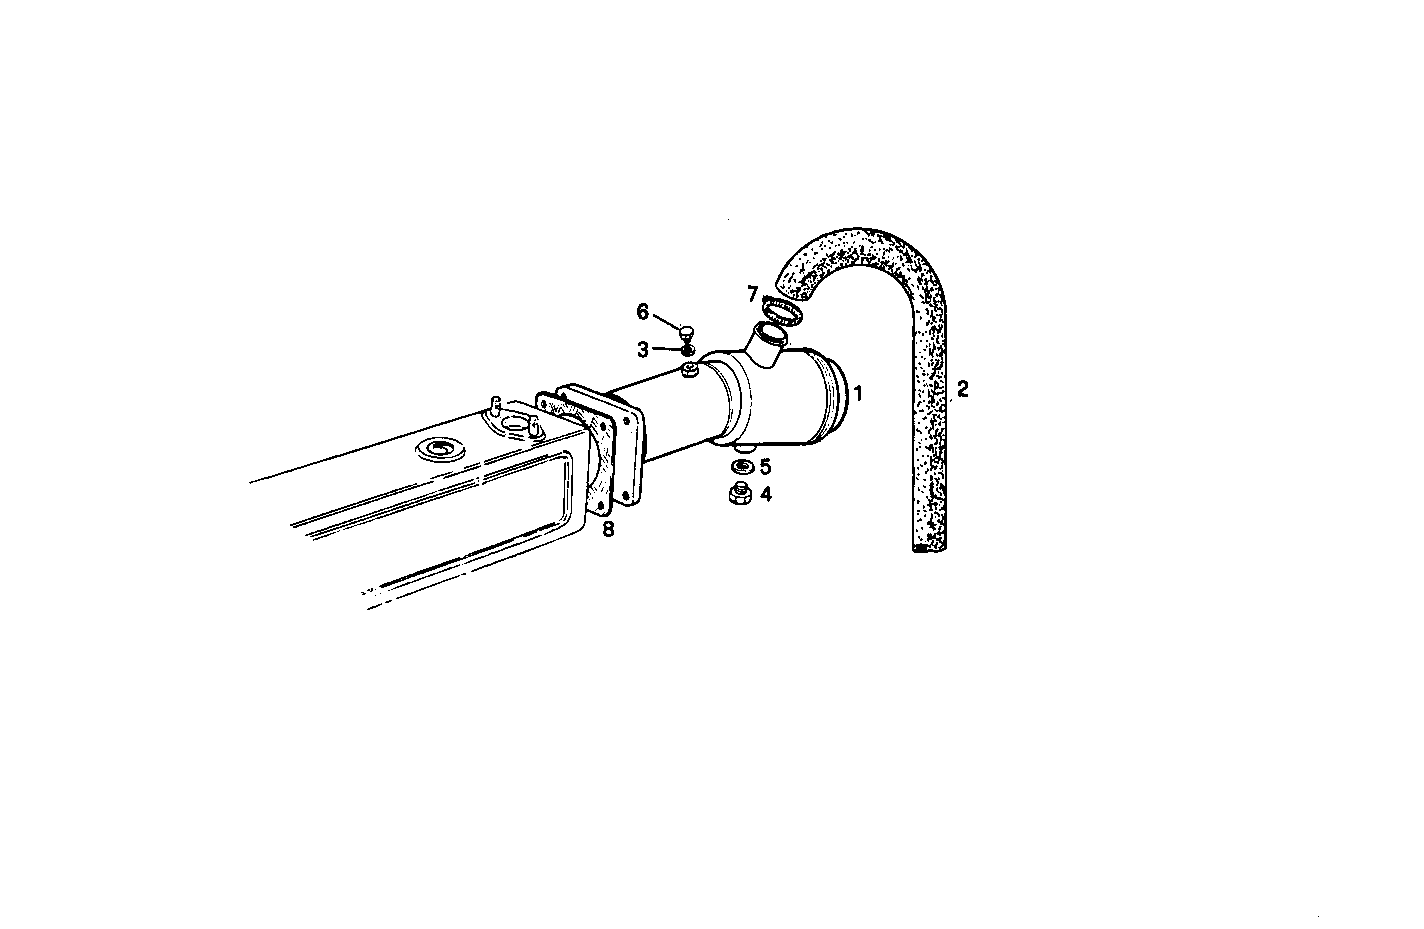 GAS-WATER MIXER WITH STERN OUTLET